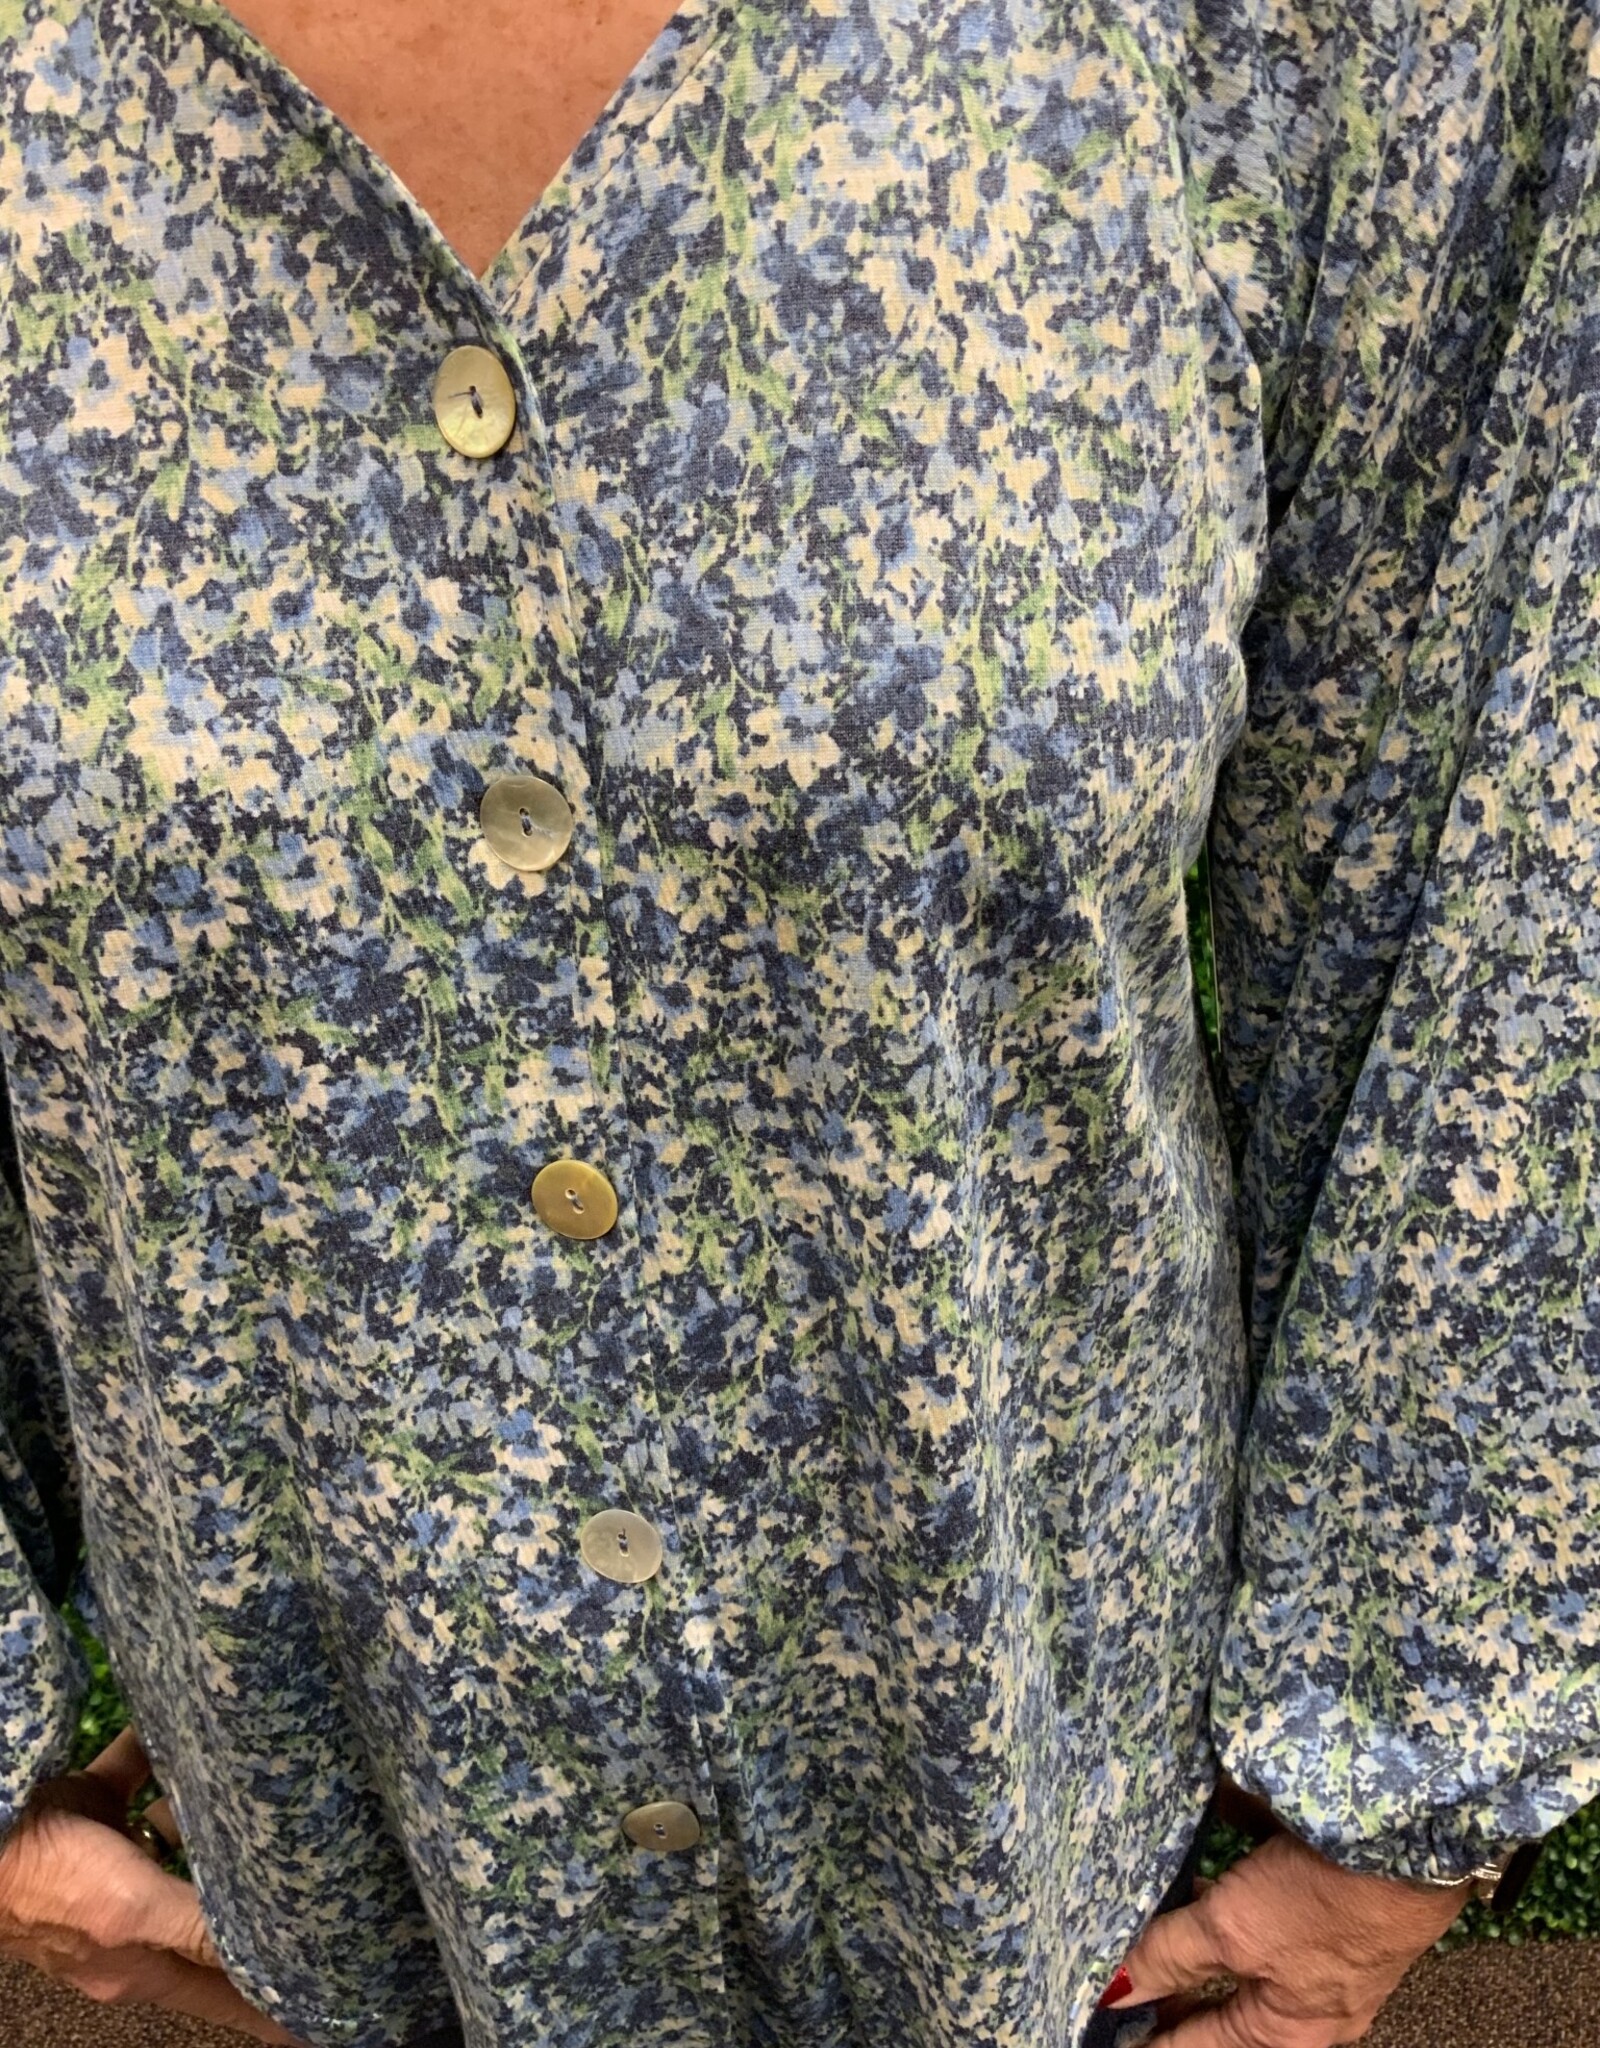 - Navy/White/Multi Floral V-Neck Button-Up Long Sleeve Top